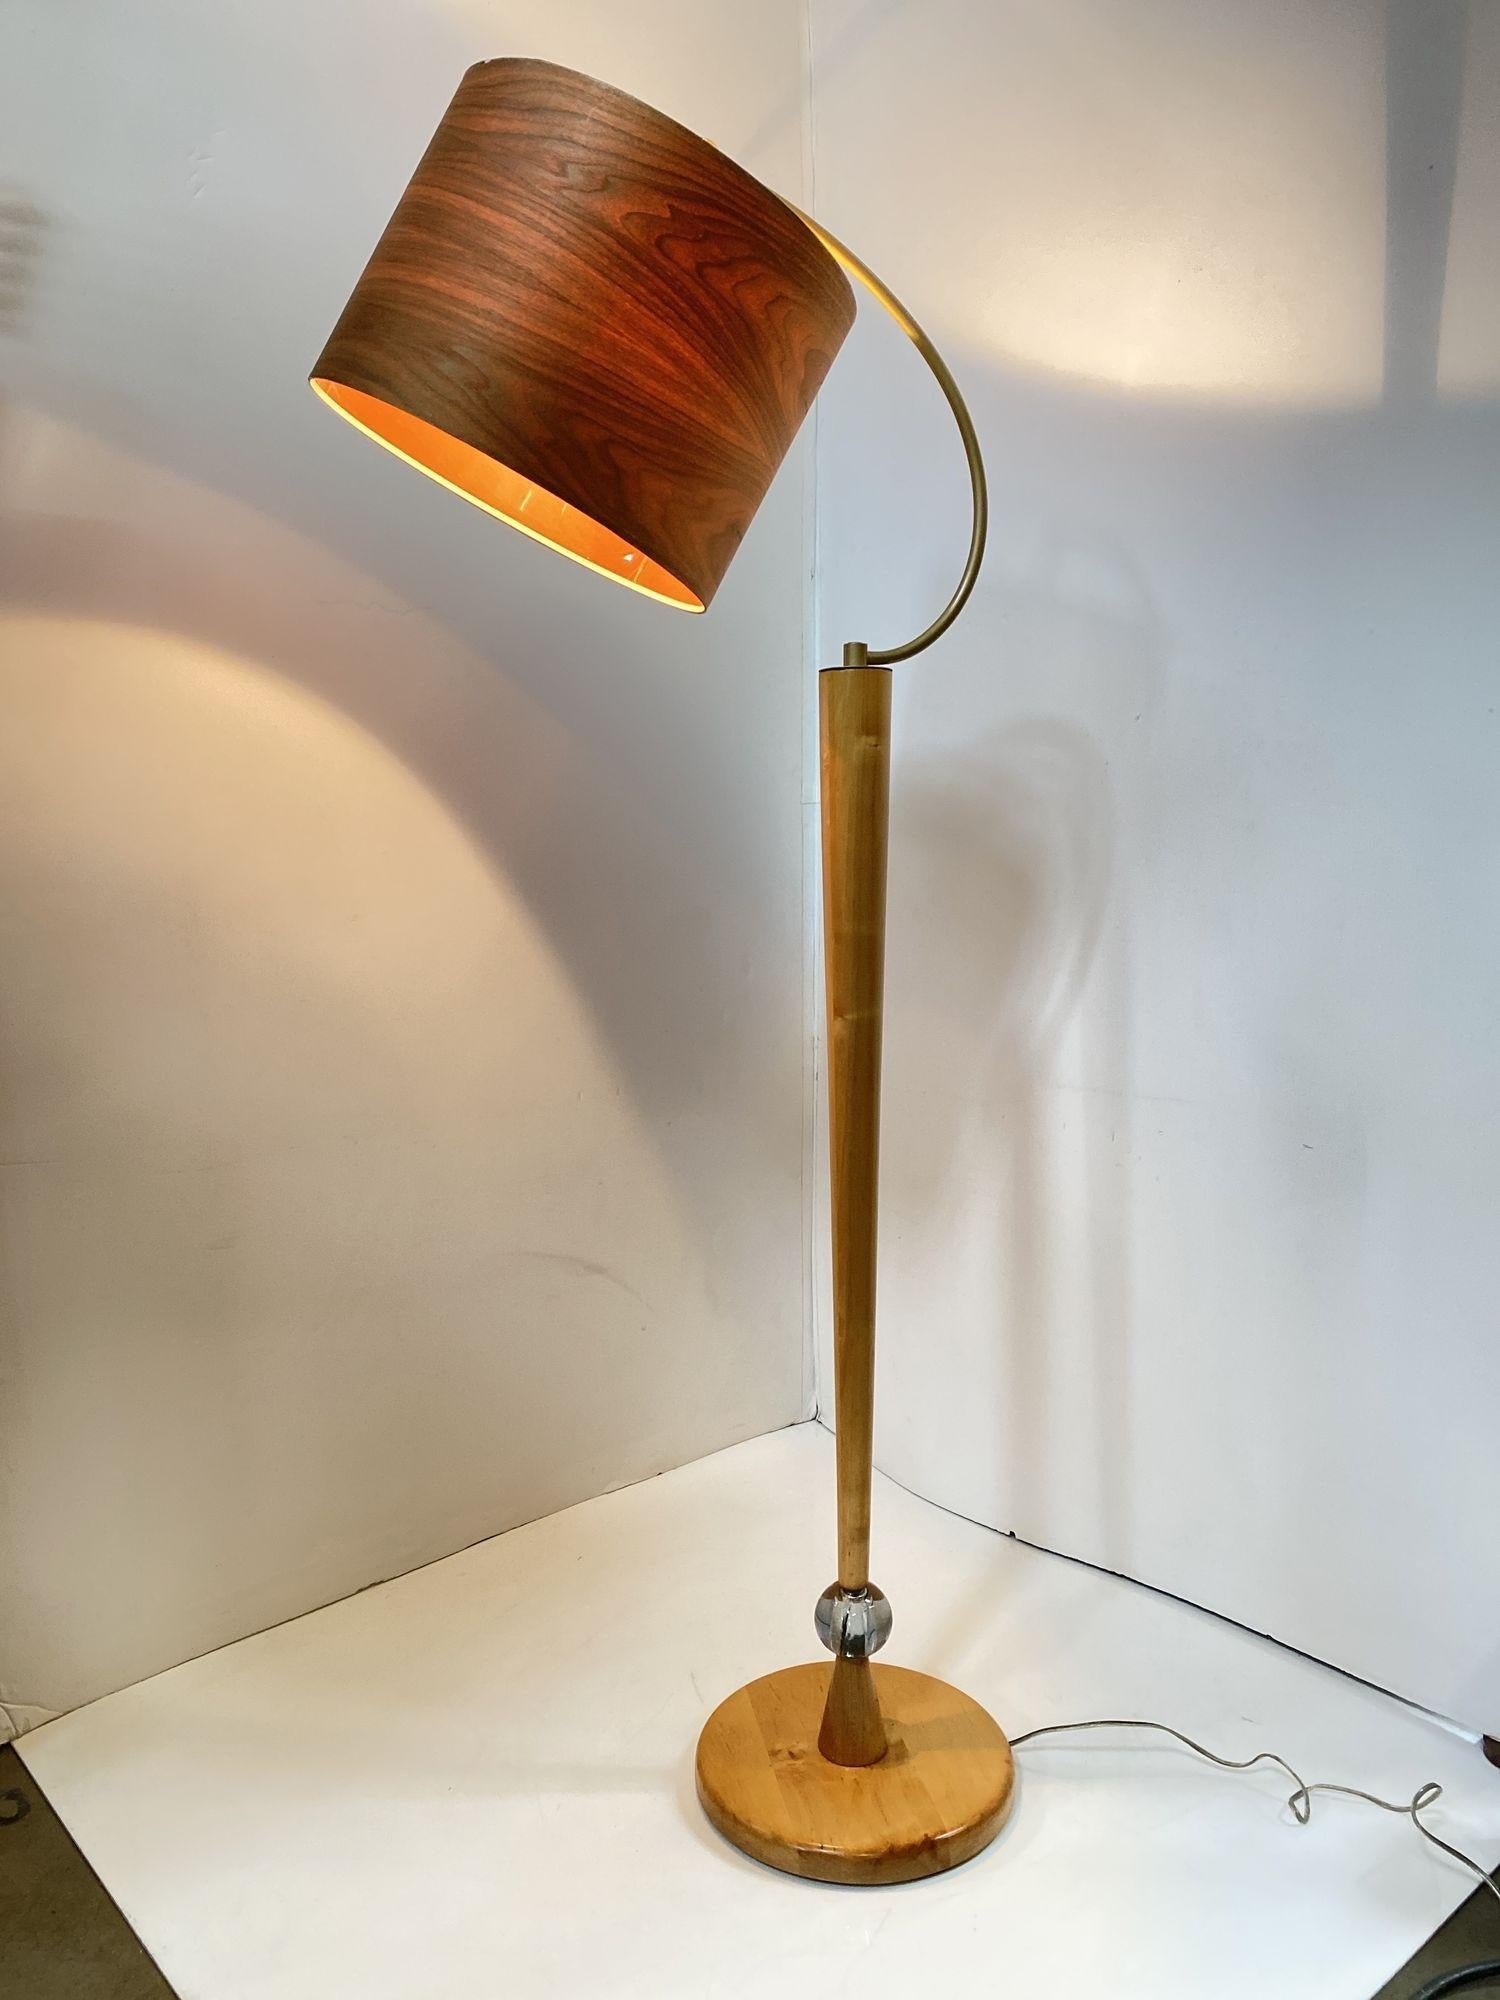 Midcentury Sculpted Maple and Lucite Floor Lamp W/ Wood Shade In Excellent Condition For Sale In Van Nuys, CA